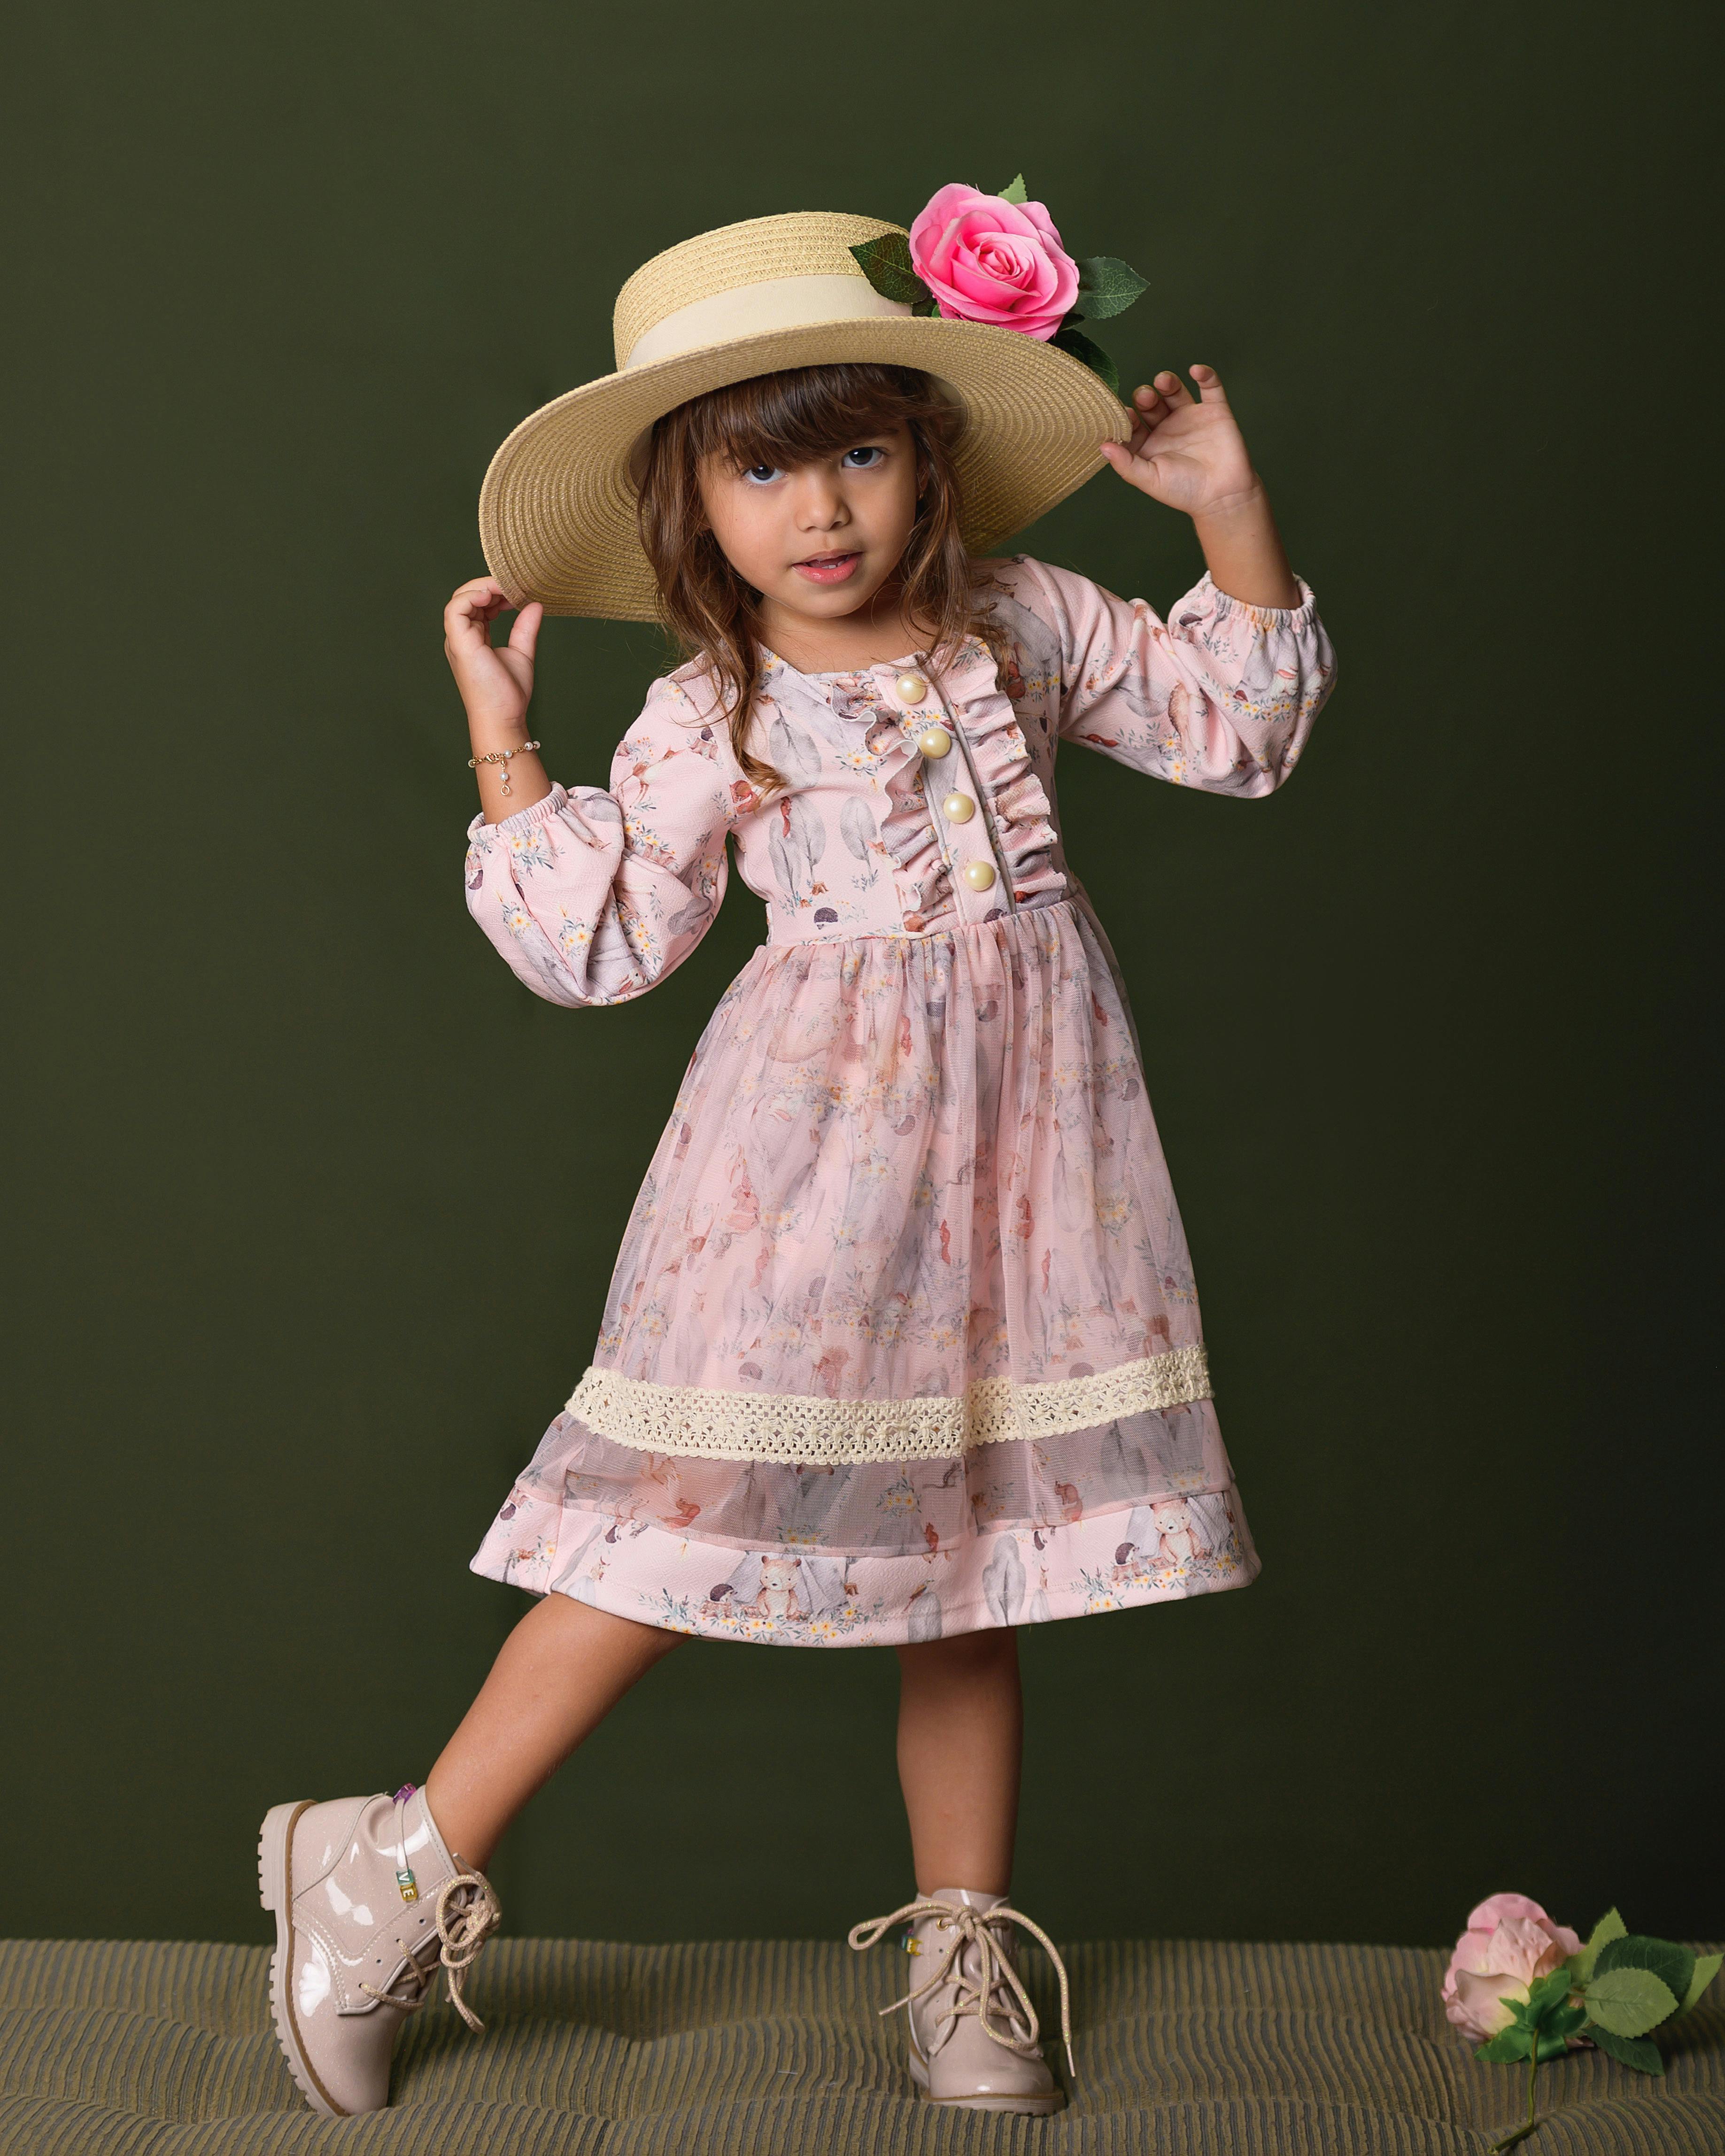 Girl Posing in Dress and Hat · Free Stock Photo